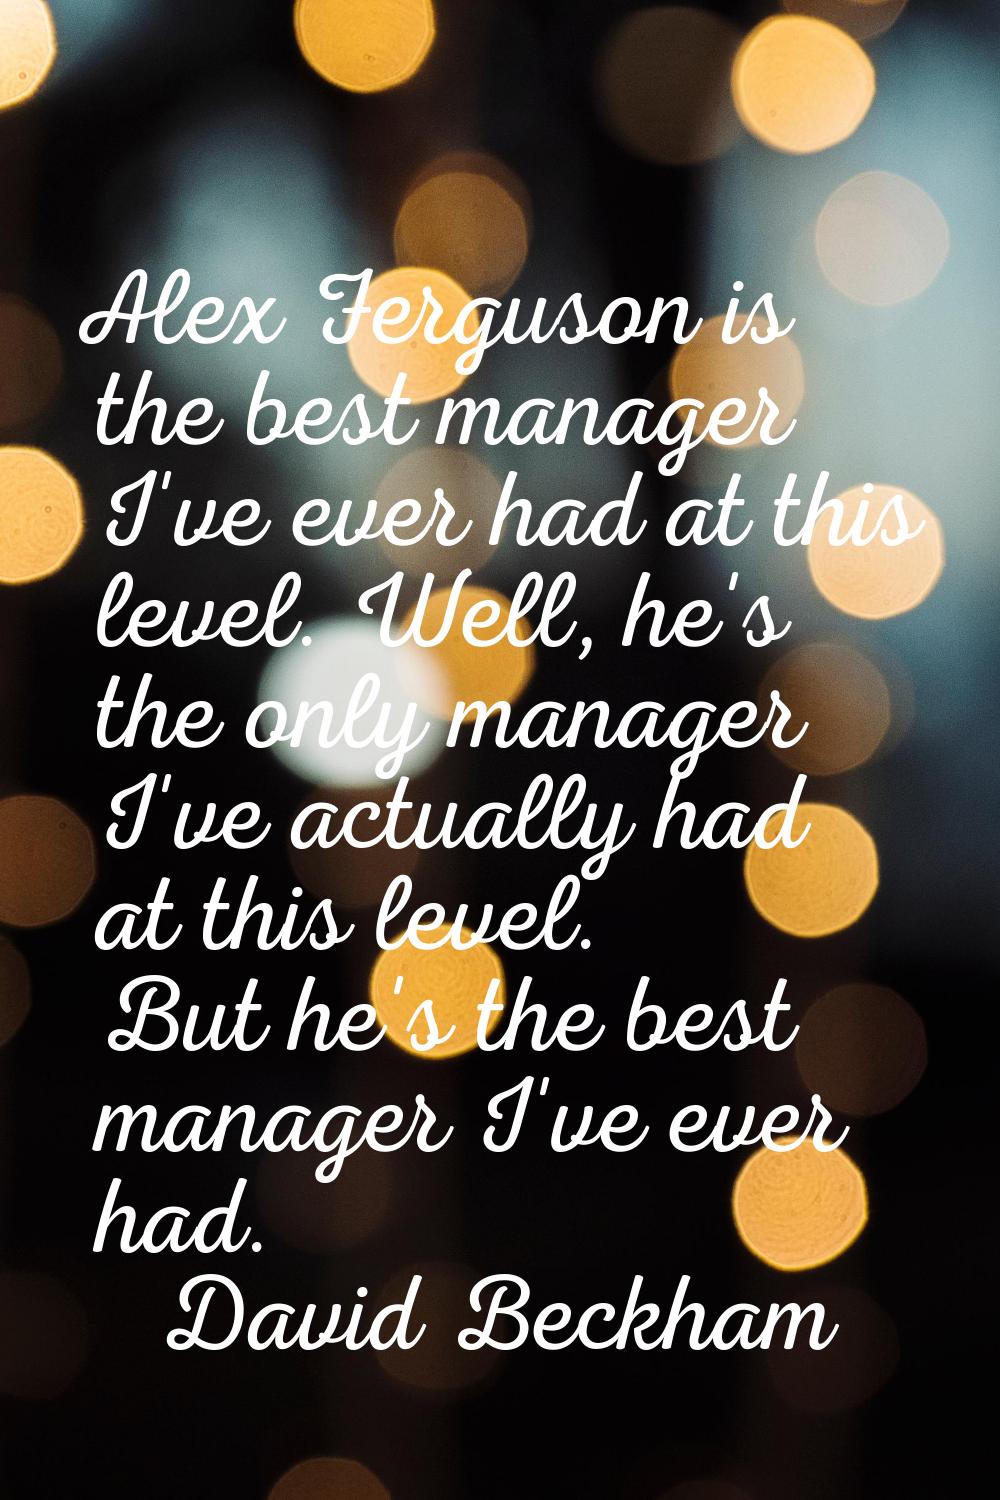 Alex Ferguson is the best manager I've ever had at this level. Well, he's the only manager I've act